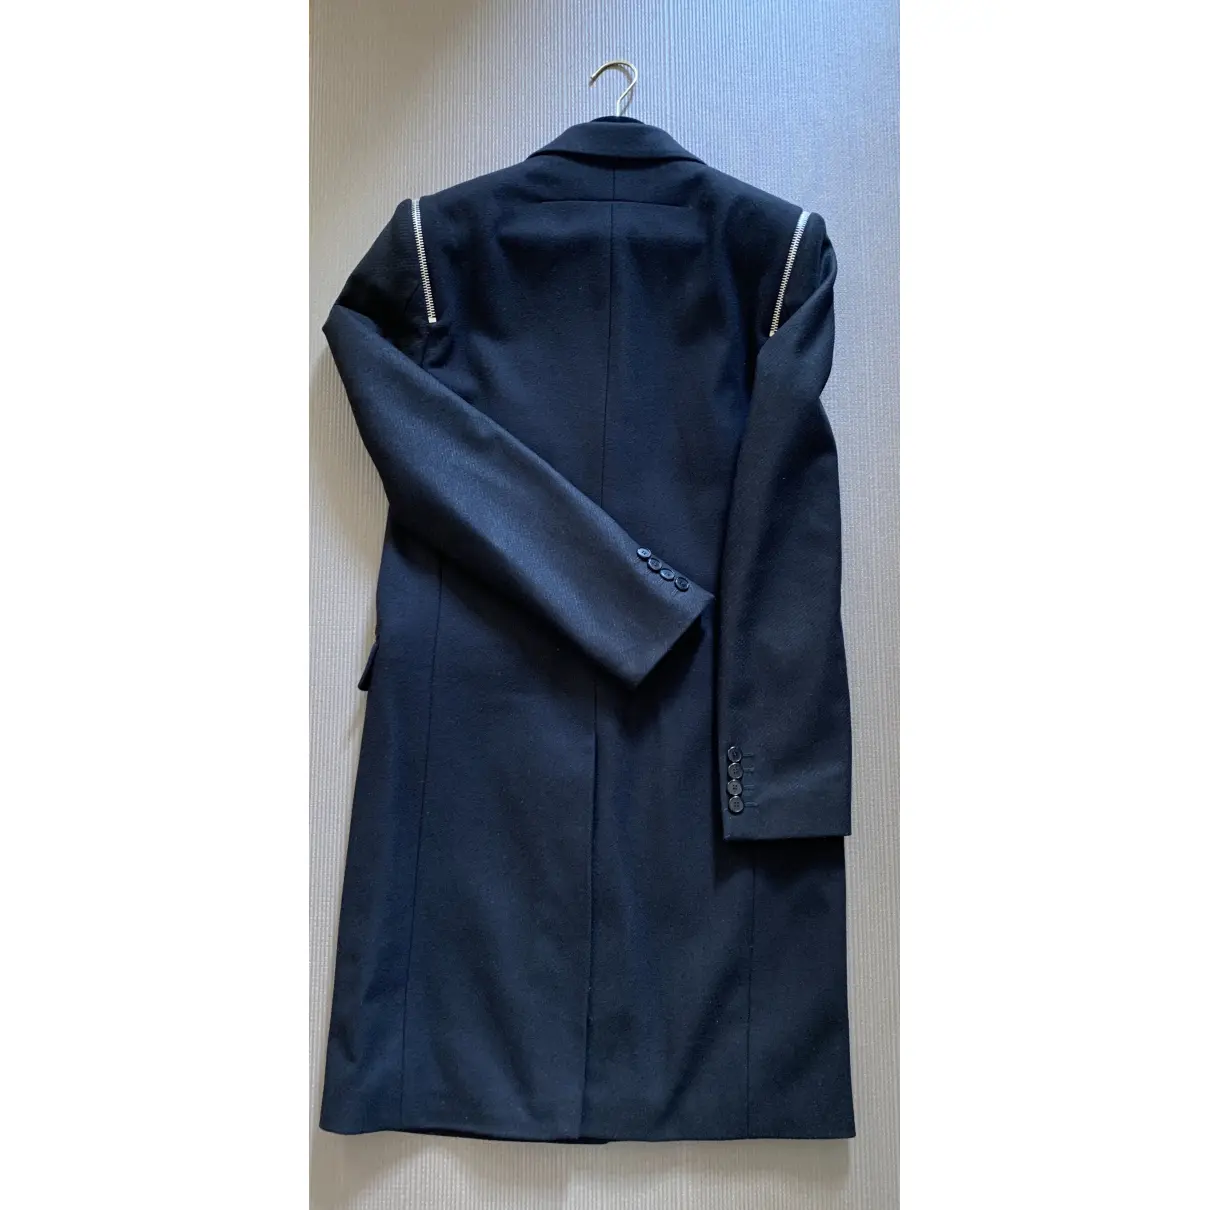 Buy Givenchy Wool coat online